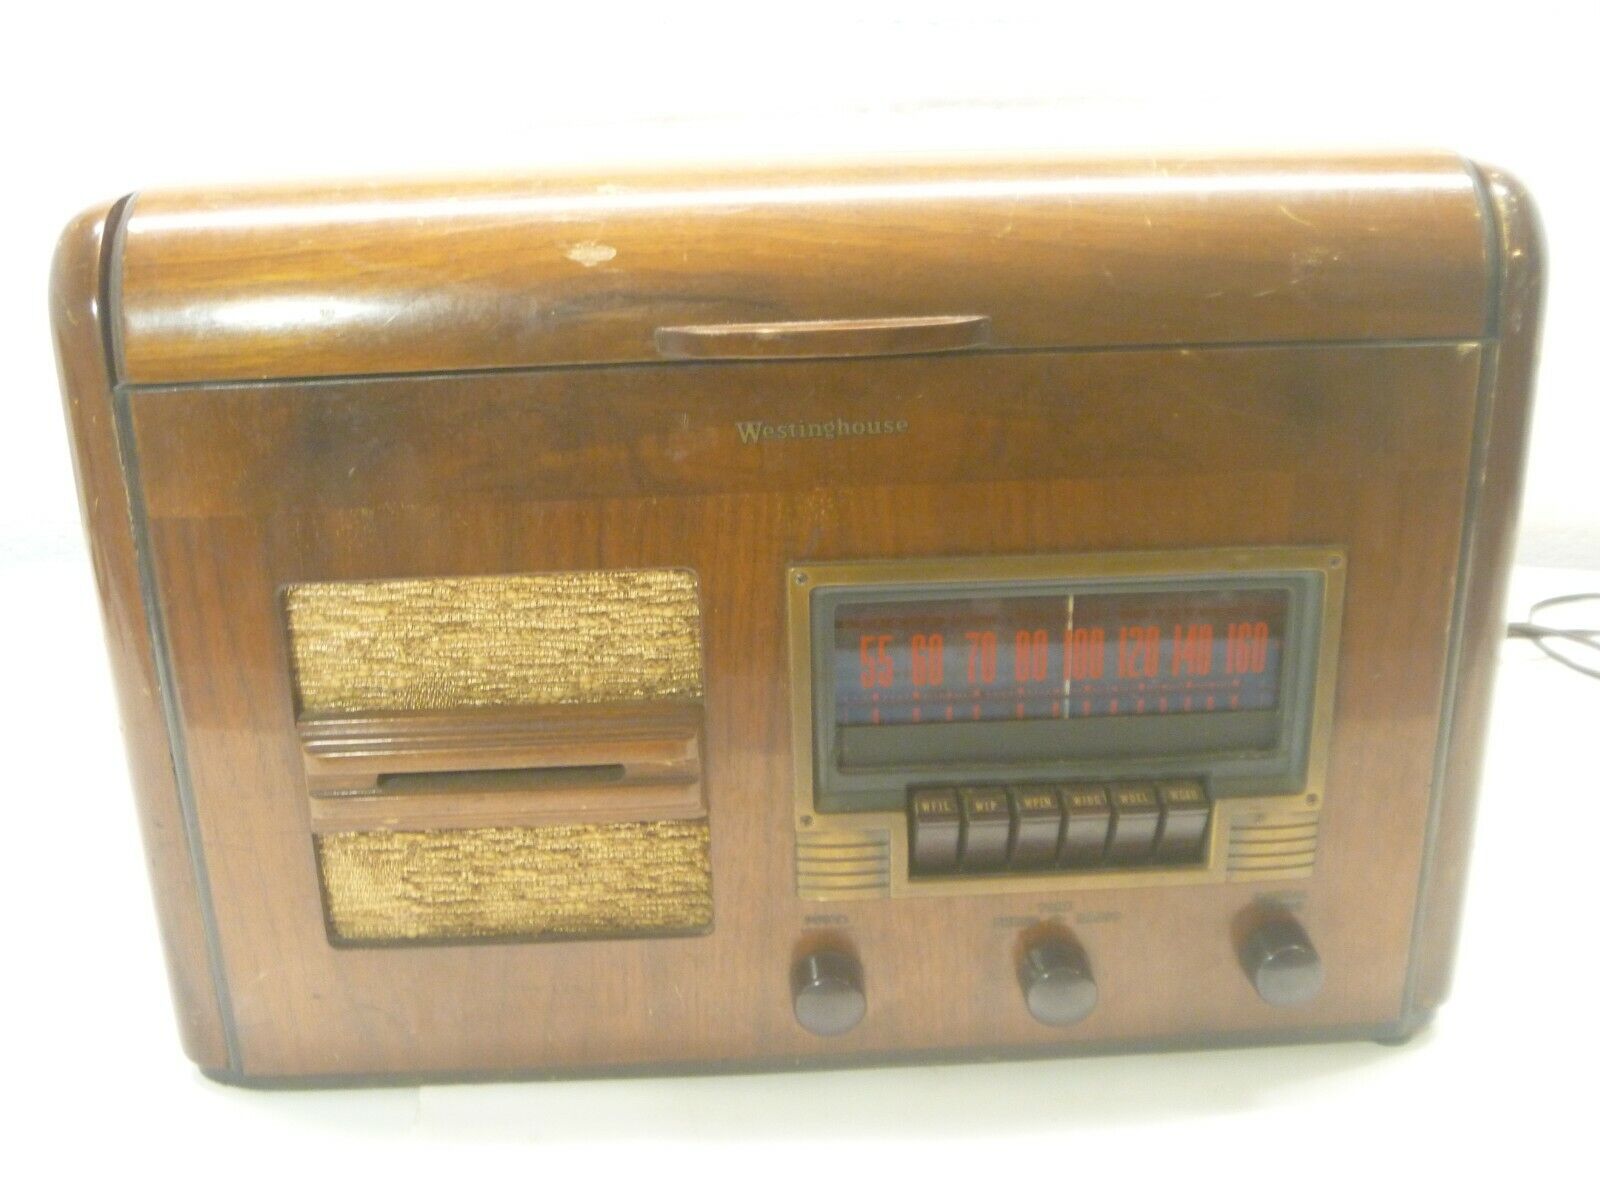 AM Westinghouse TUBE Radio PHONOGRAPH  WR180 , circa 1940\'s WOOD CABINET AS IS